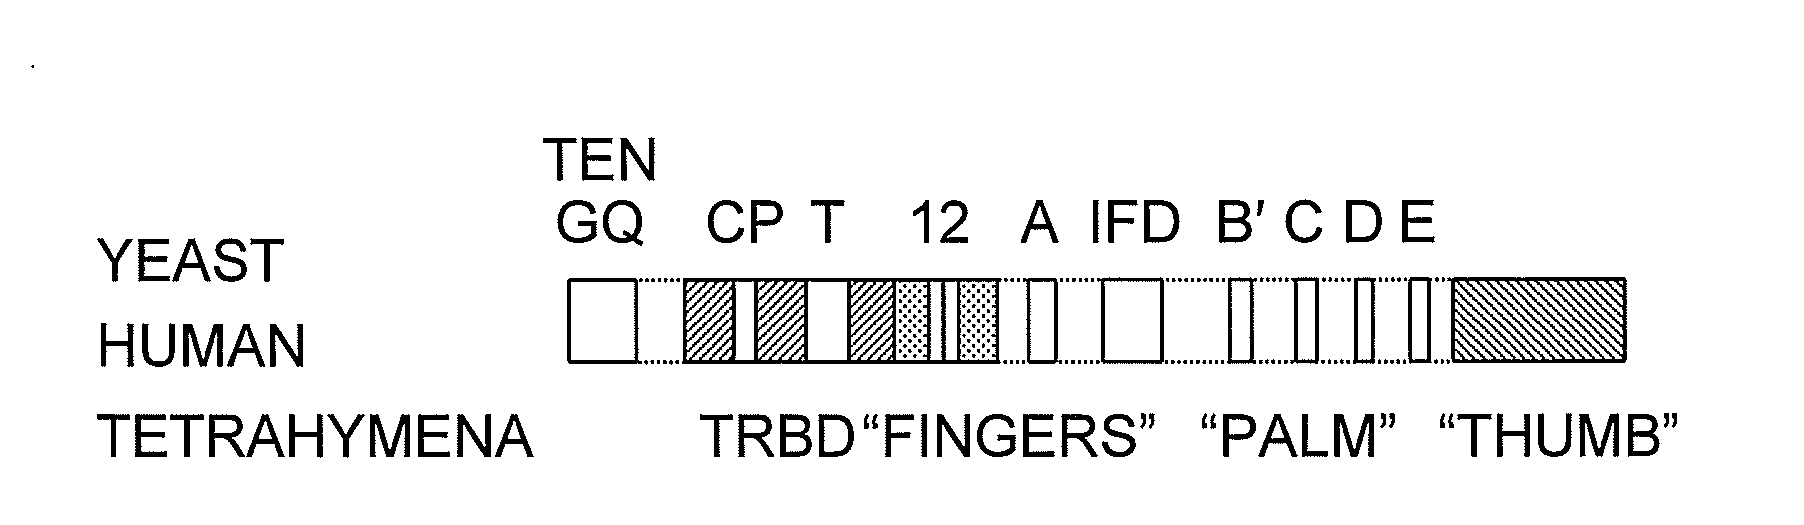 TRBD-Binding Effectors and Methods for Using the Same to Modulate Telomerase Activity